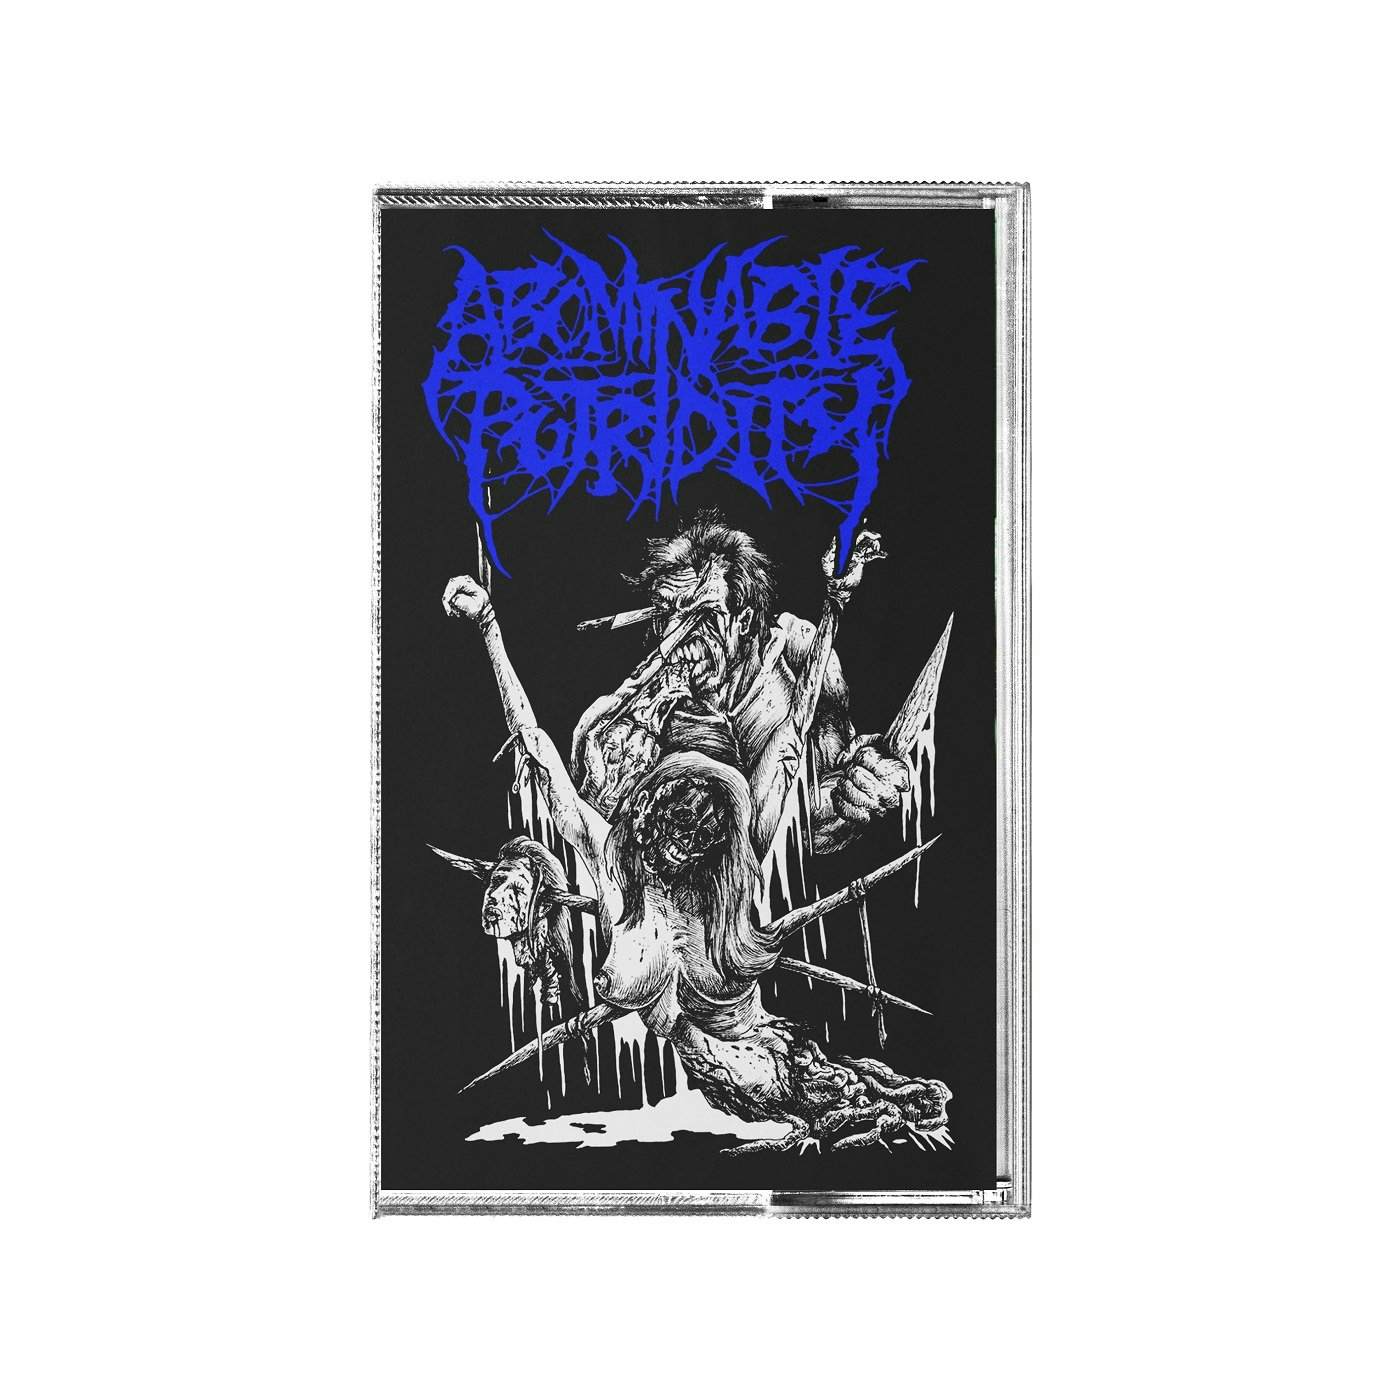 Abominable Putridity "Promo 2006 (Blue)" Cassette